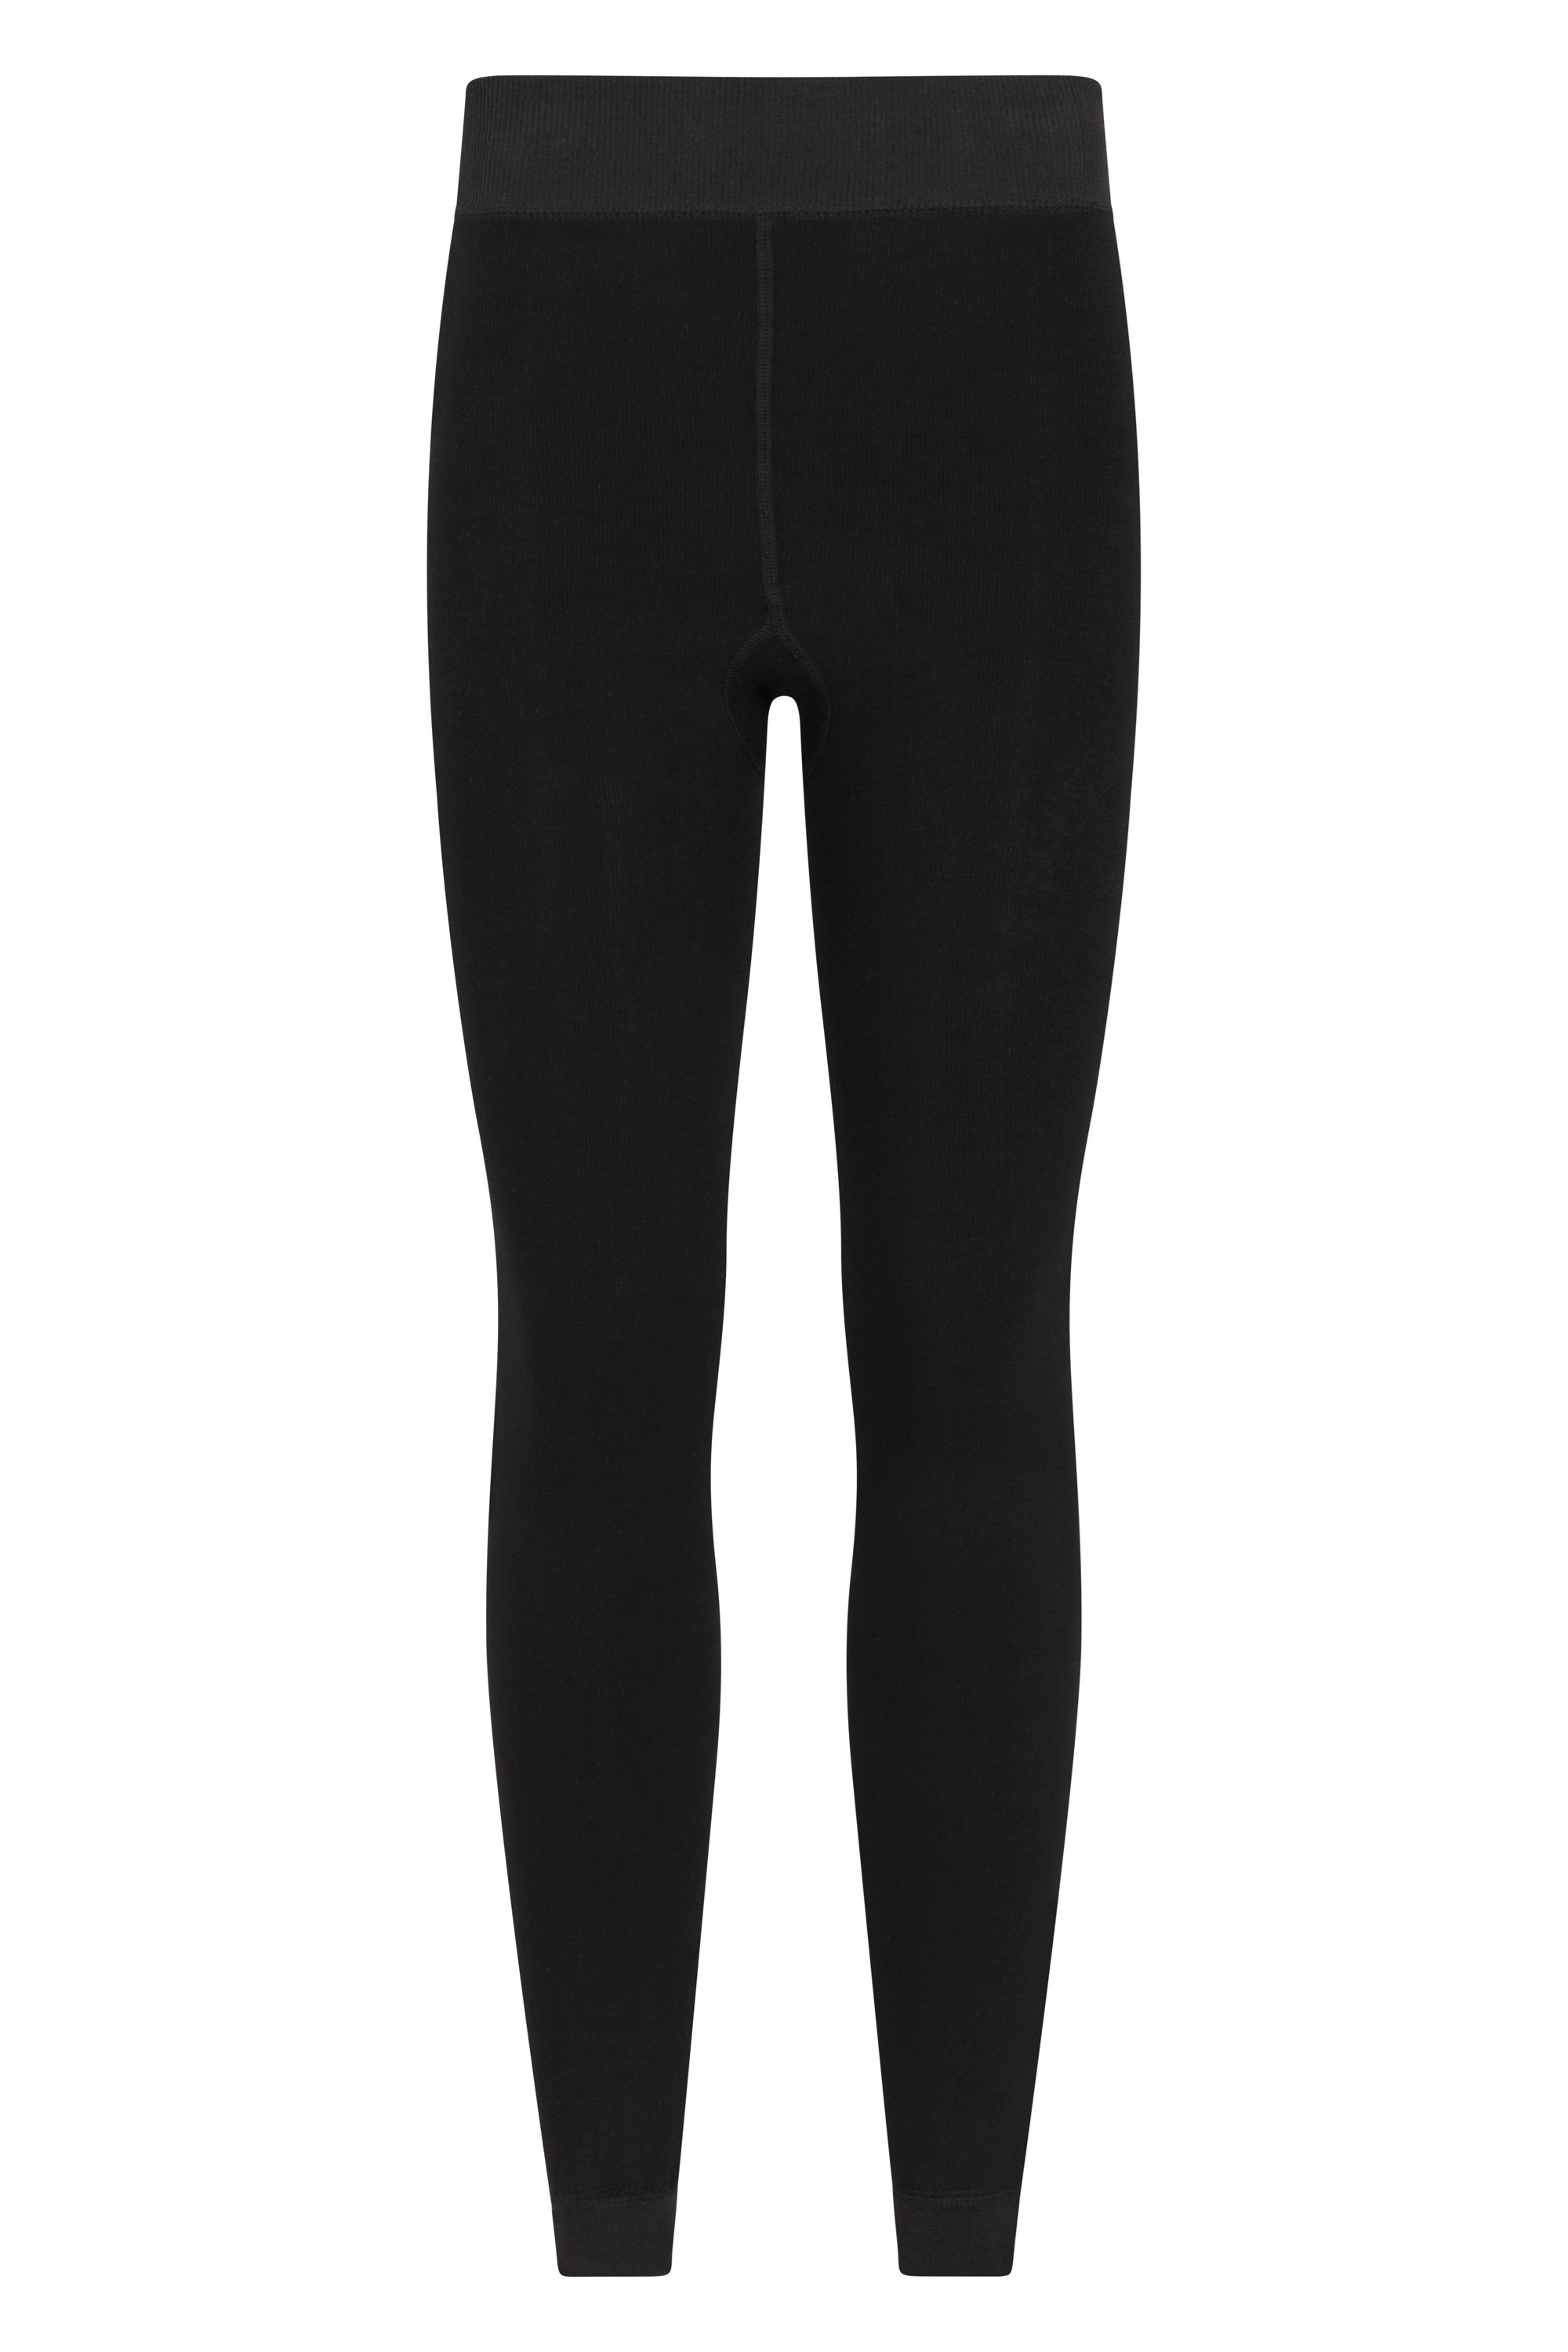 Warm Thermal Thick Fleece Lined Full Length Legging Pants Plus